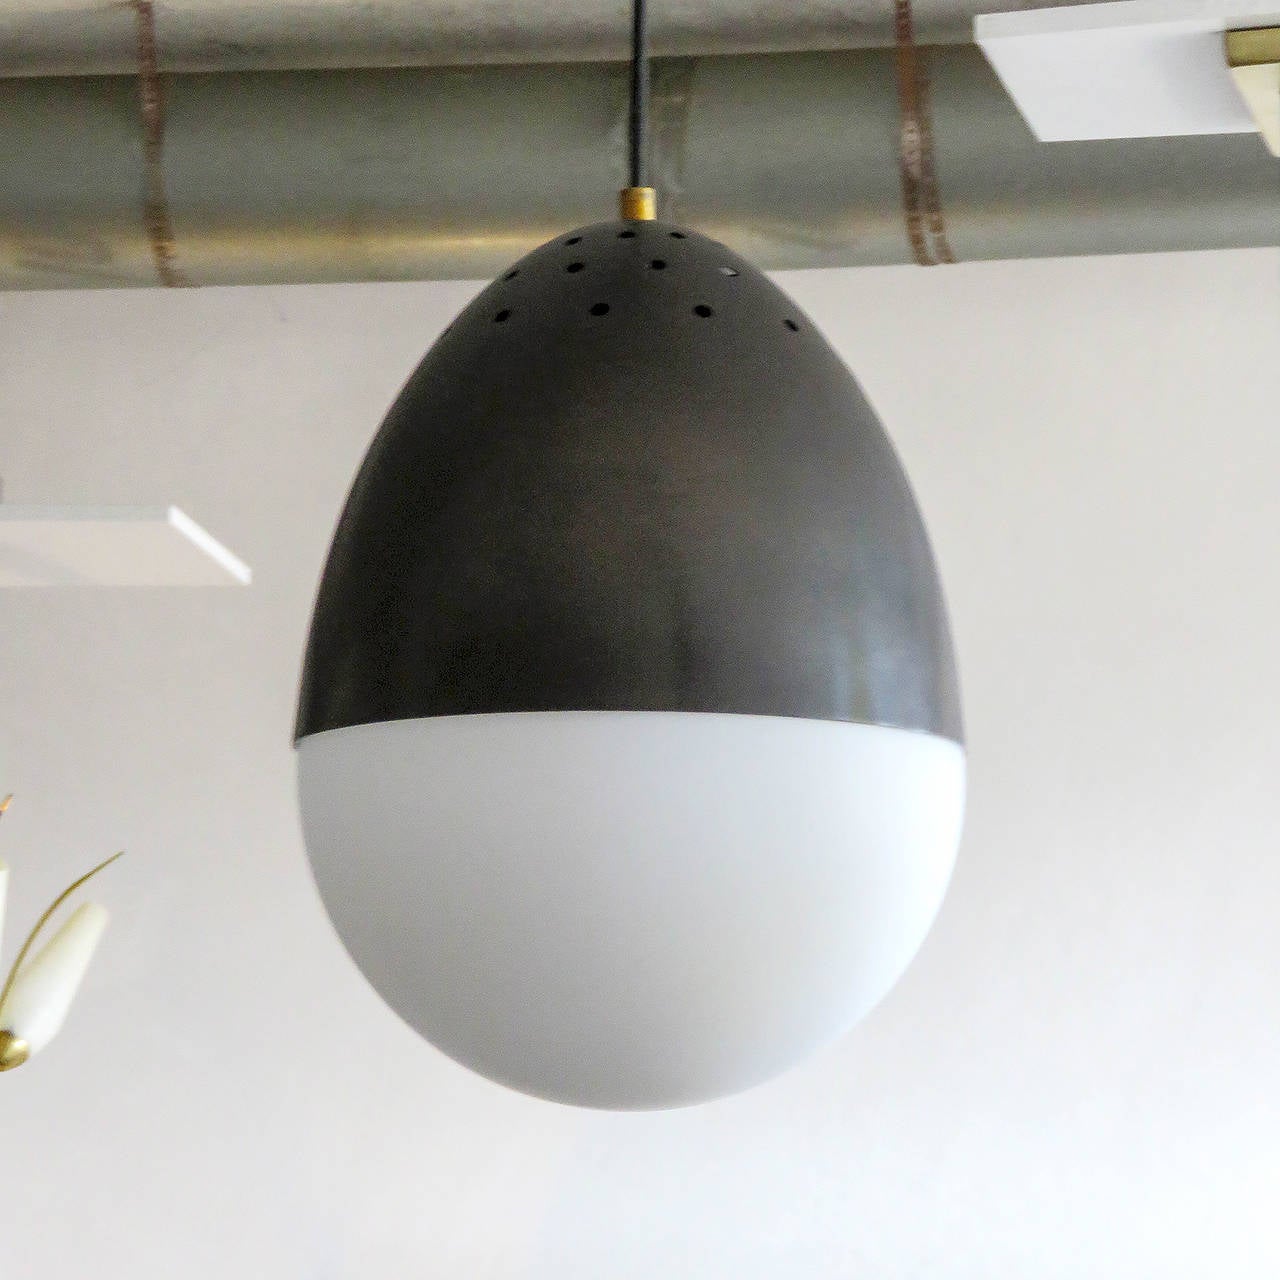 Elegant Italian milk glass pendant light by Stilnovo, matte milkglass globe with dark brass patinated, partially perforated hood, suspended from black cloth wire.